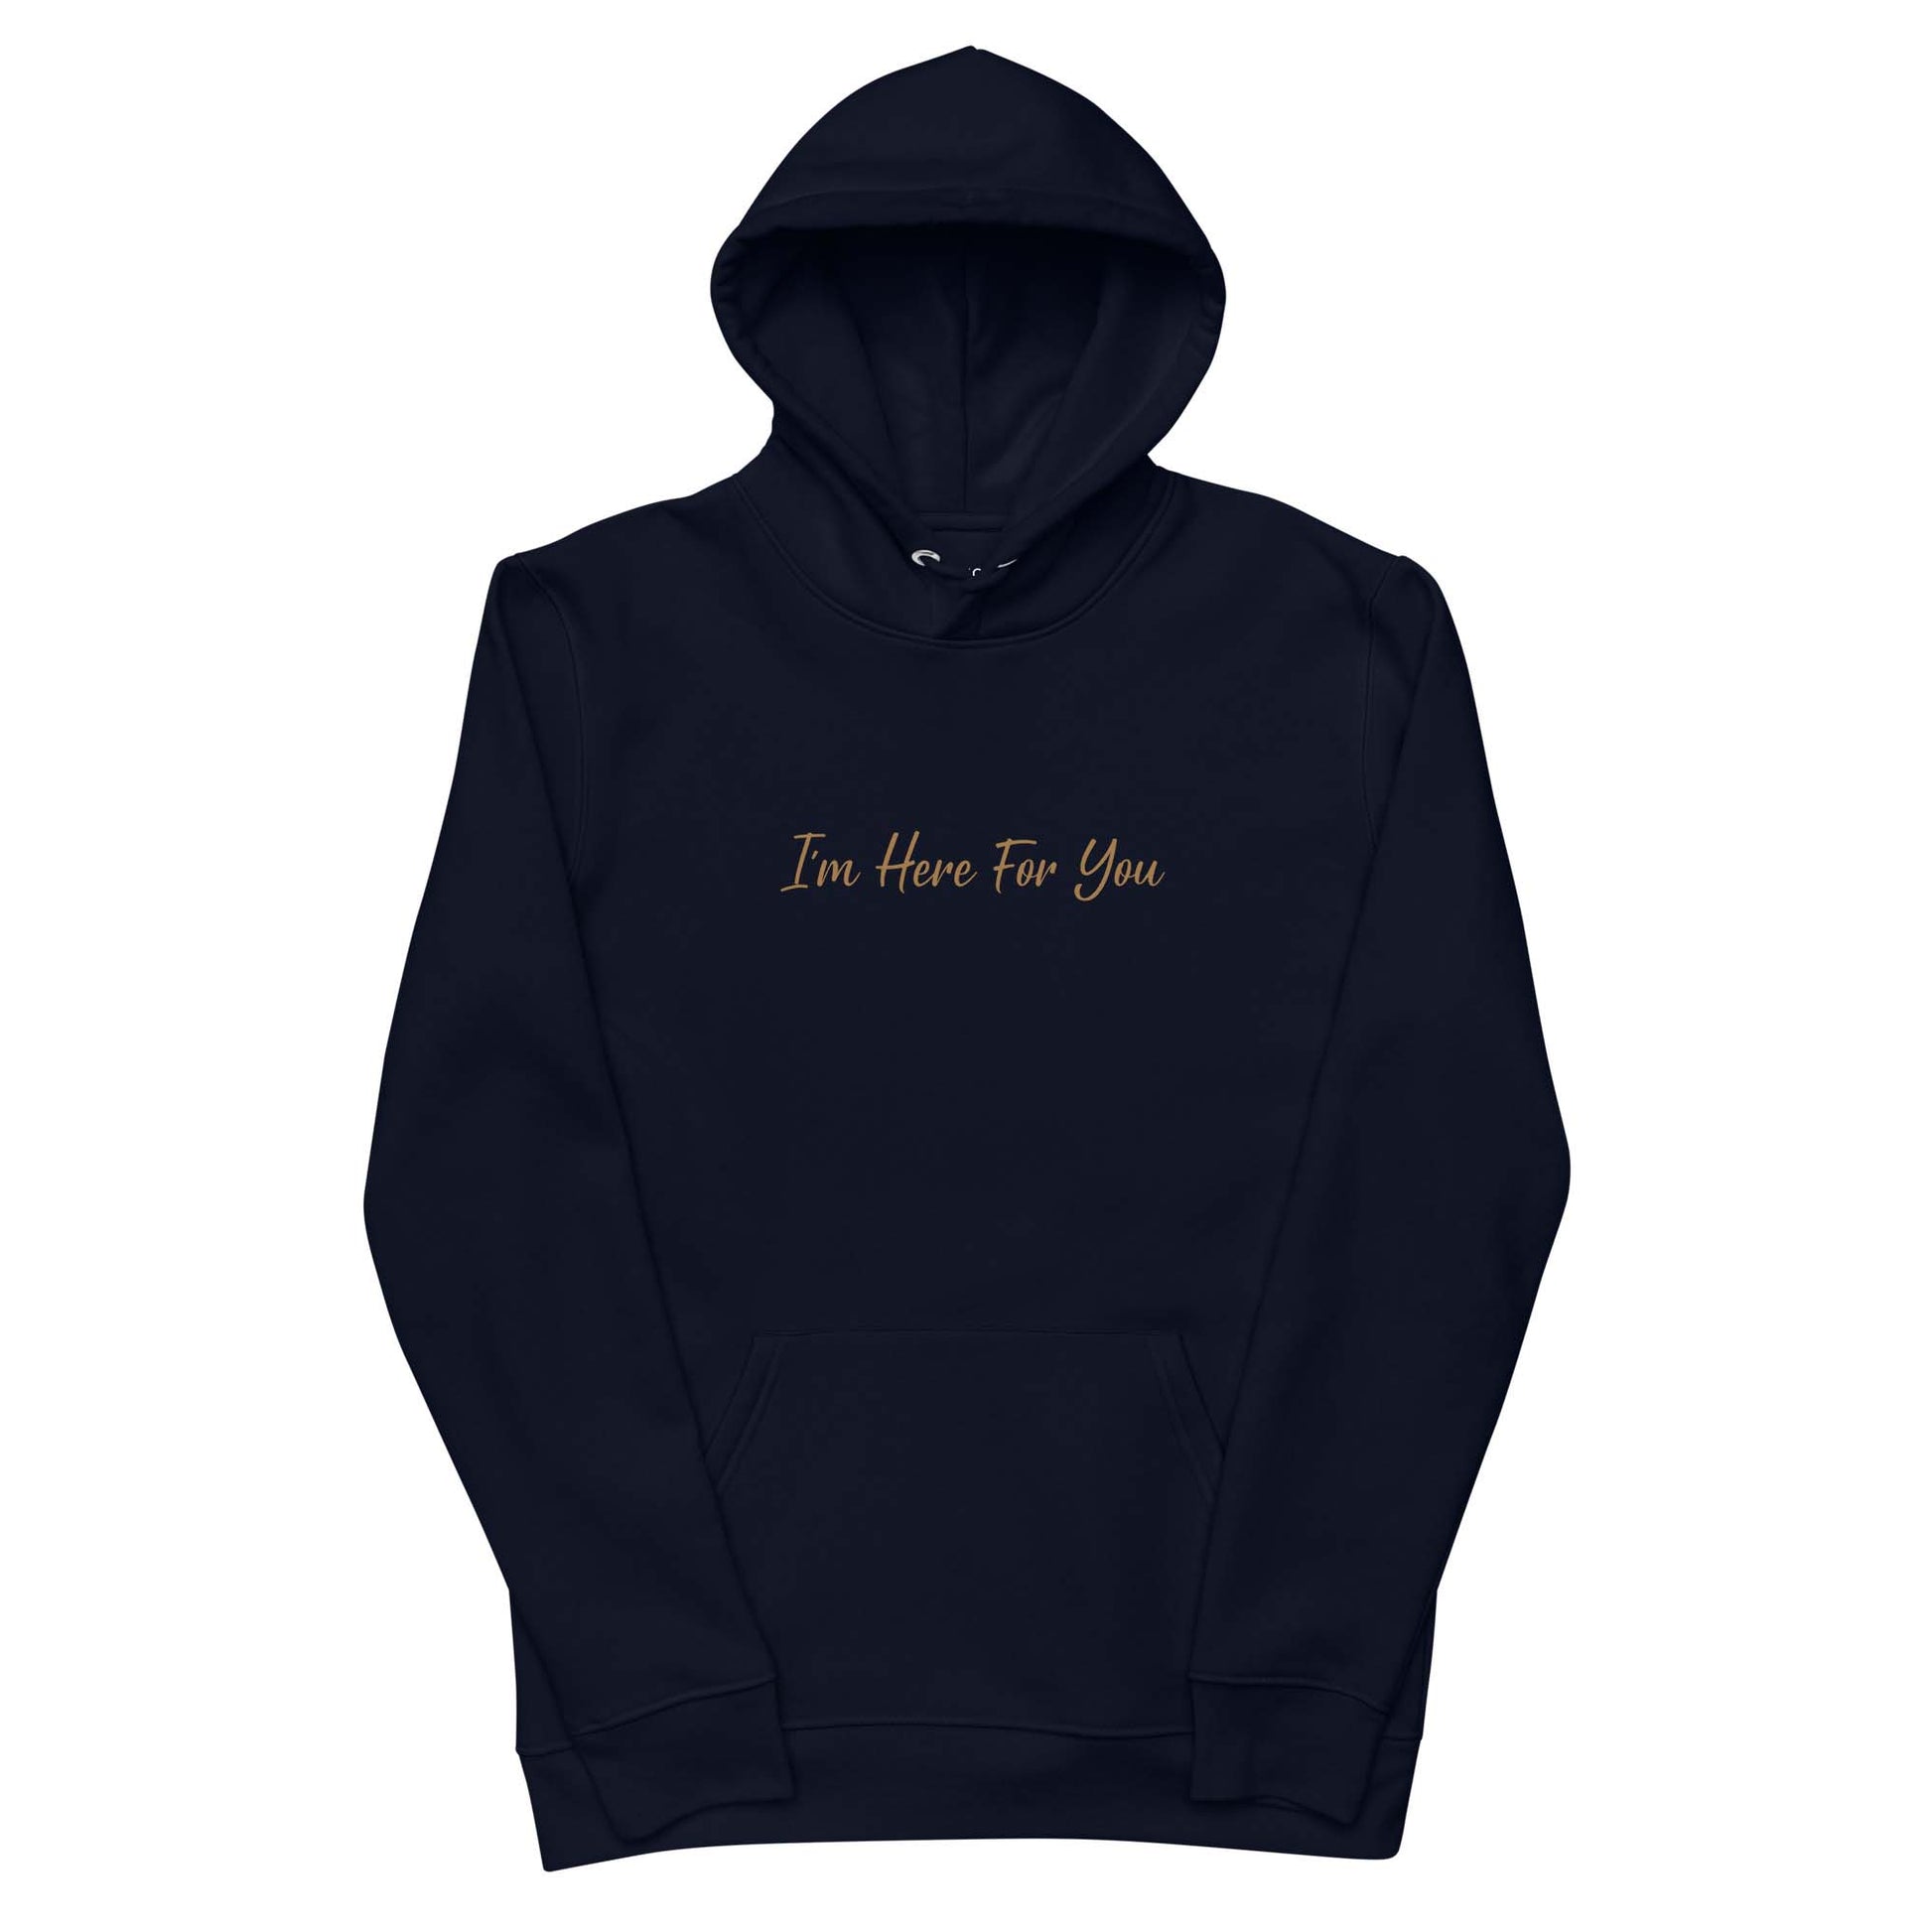 Men black ethical hoodie with inspirational quote, "I'm Here For You."